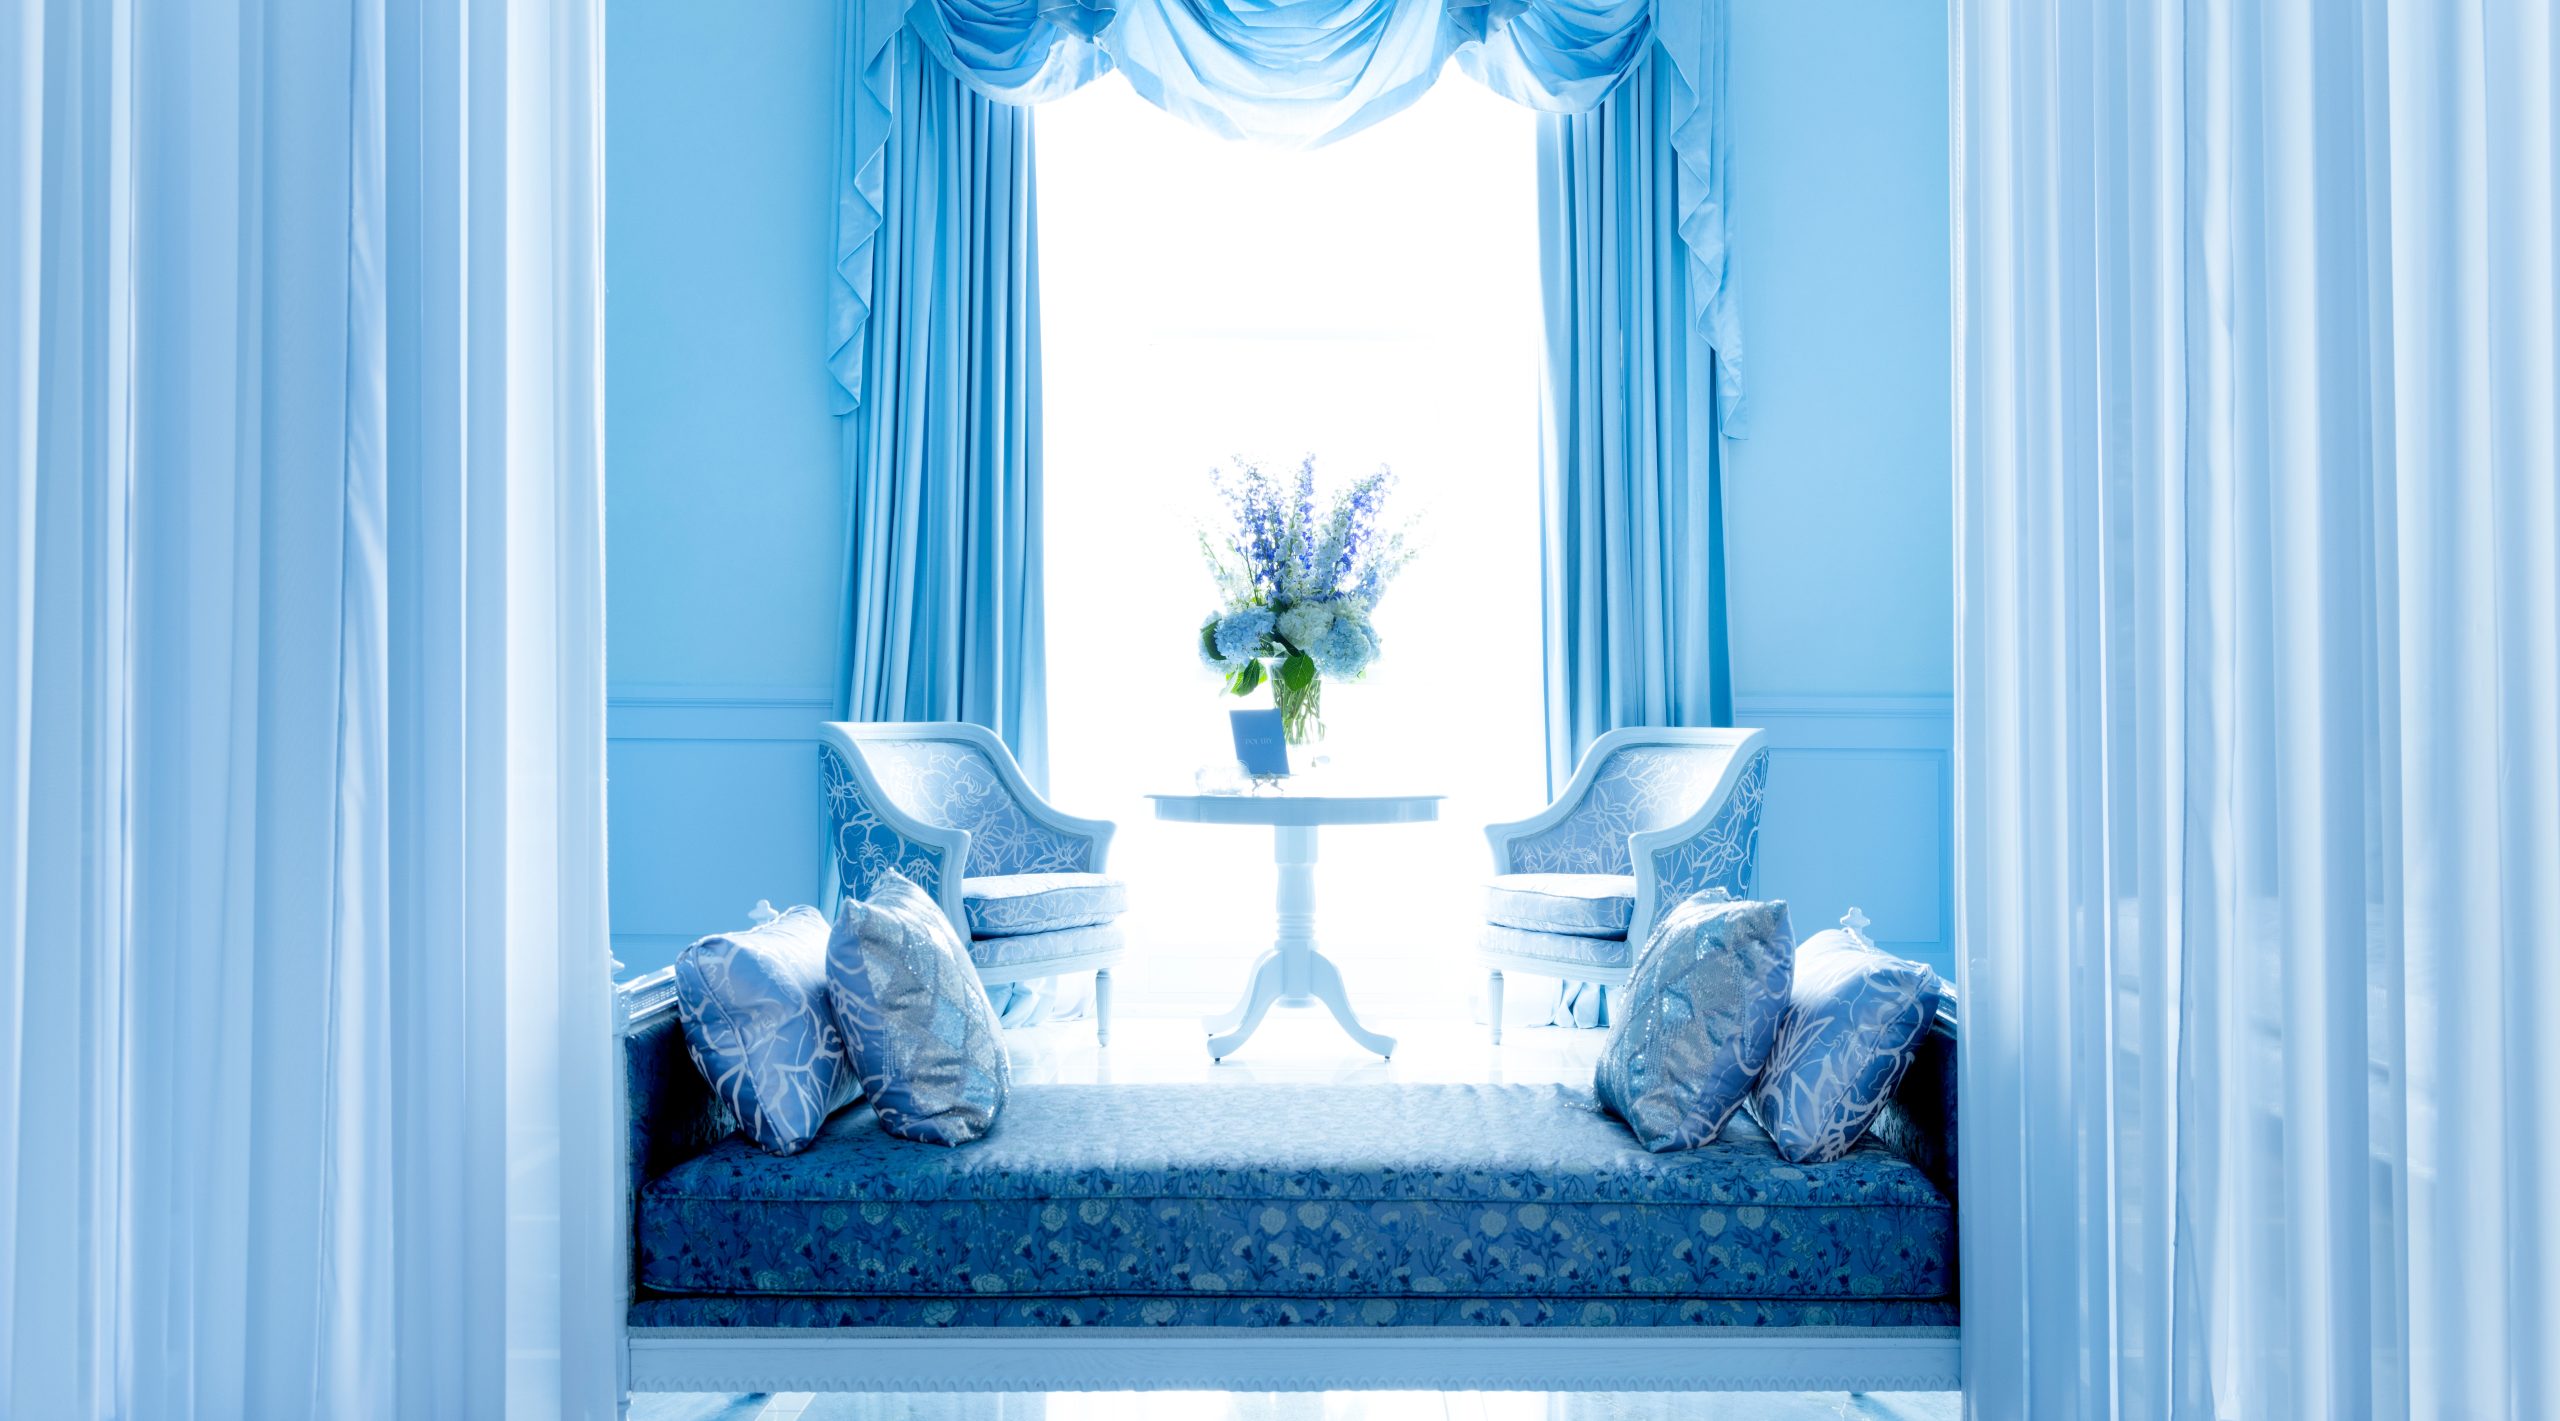 The Bleu Room at Nemacolin - Architectural Digest